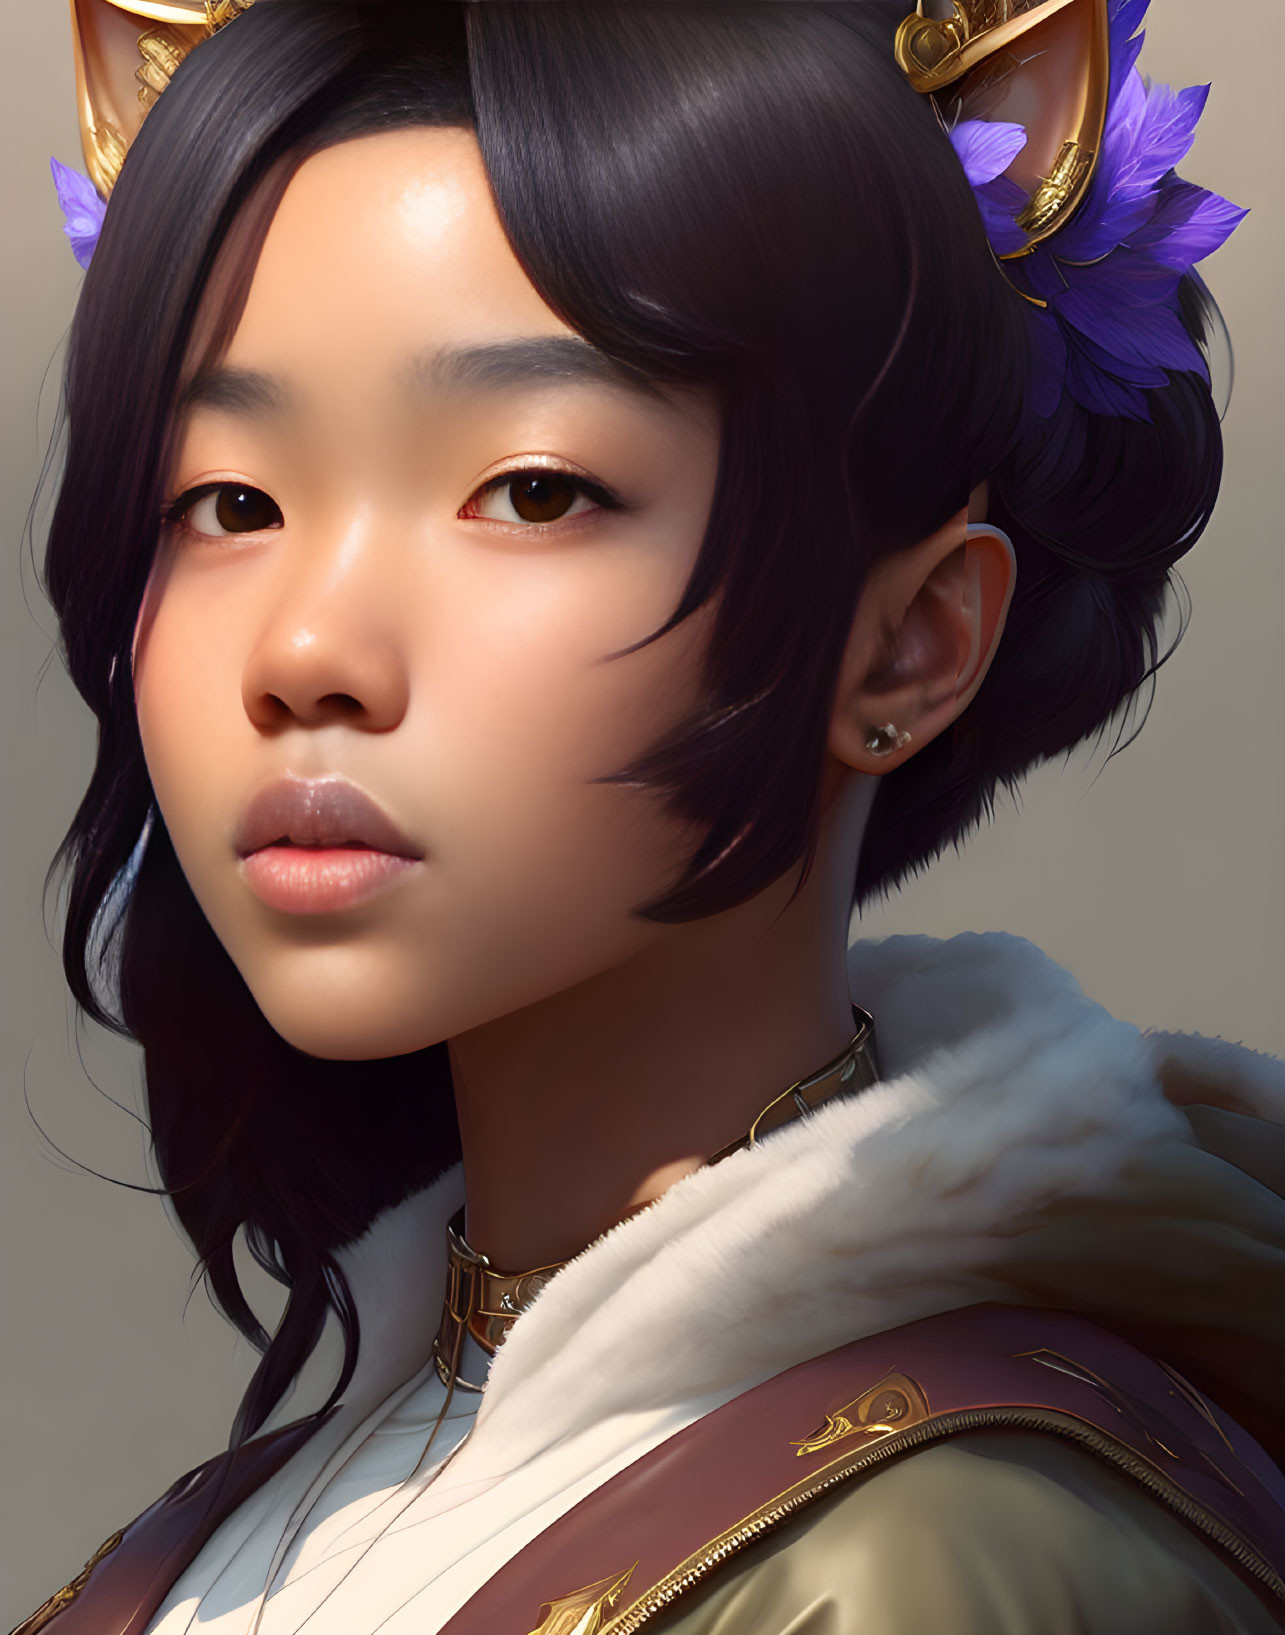 Digital portrait of young woman with fantasy elements: pointed ears, ornate golden accessories, purple floral designs